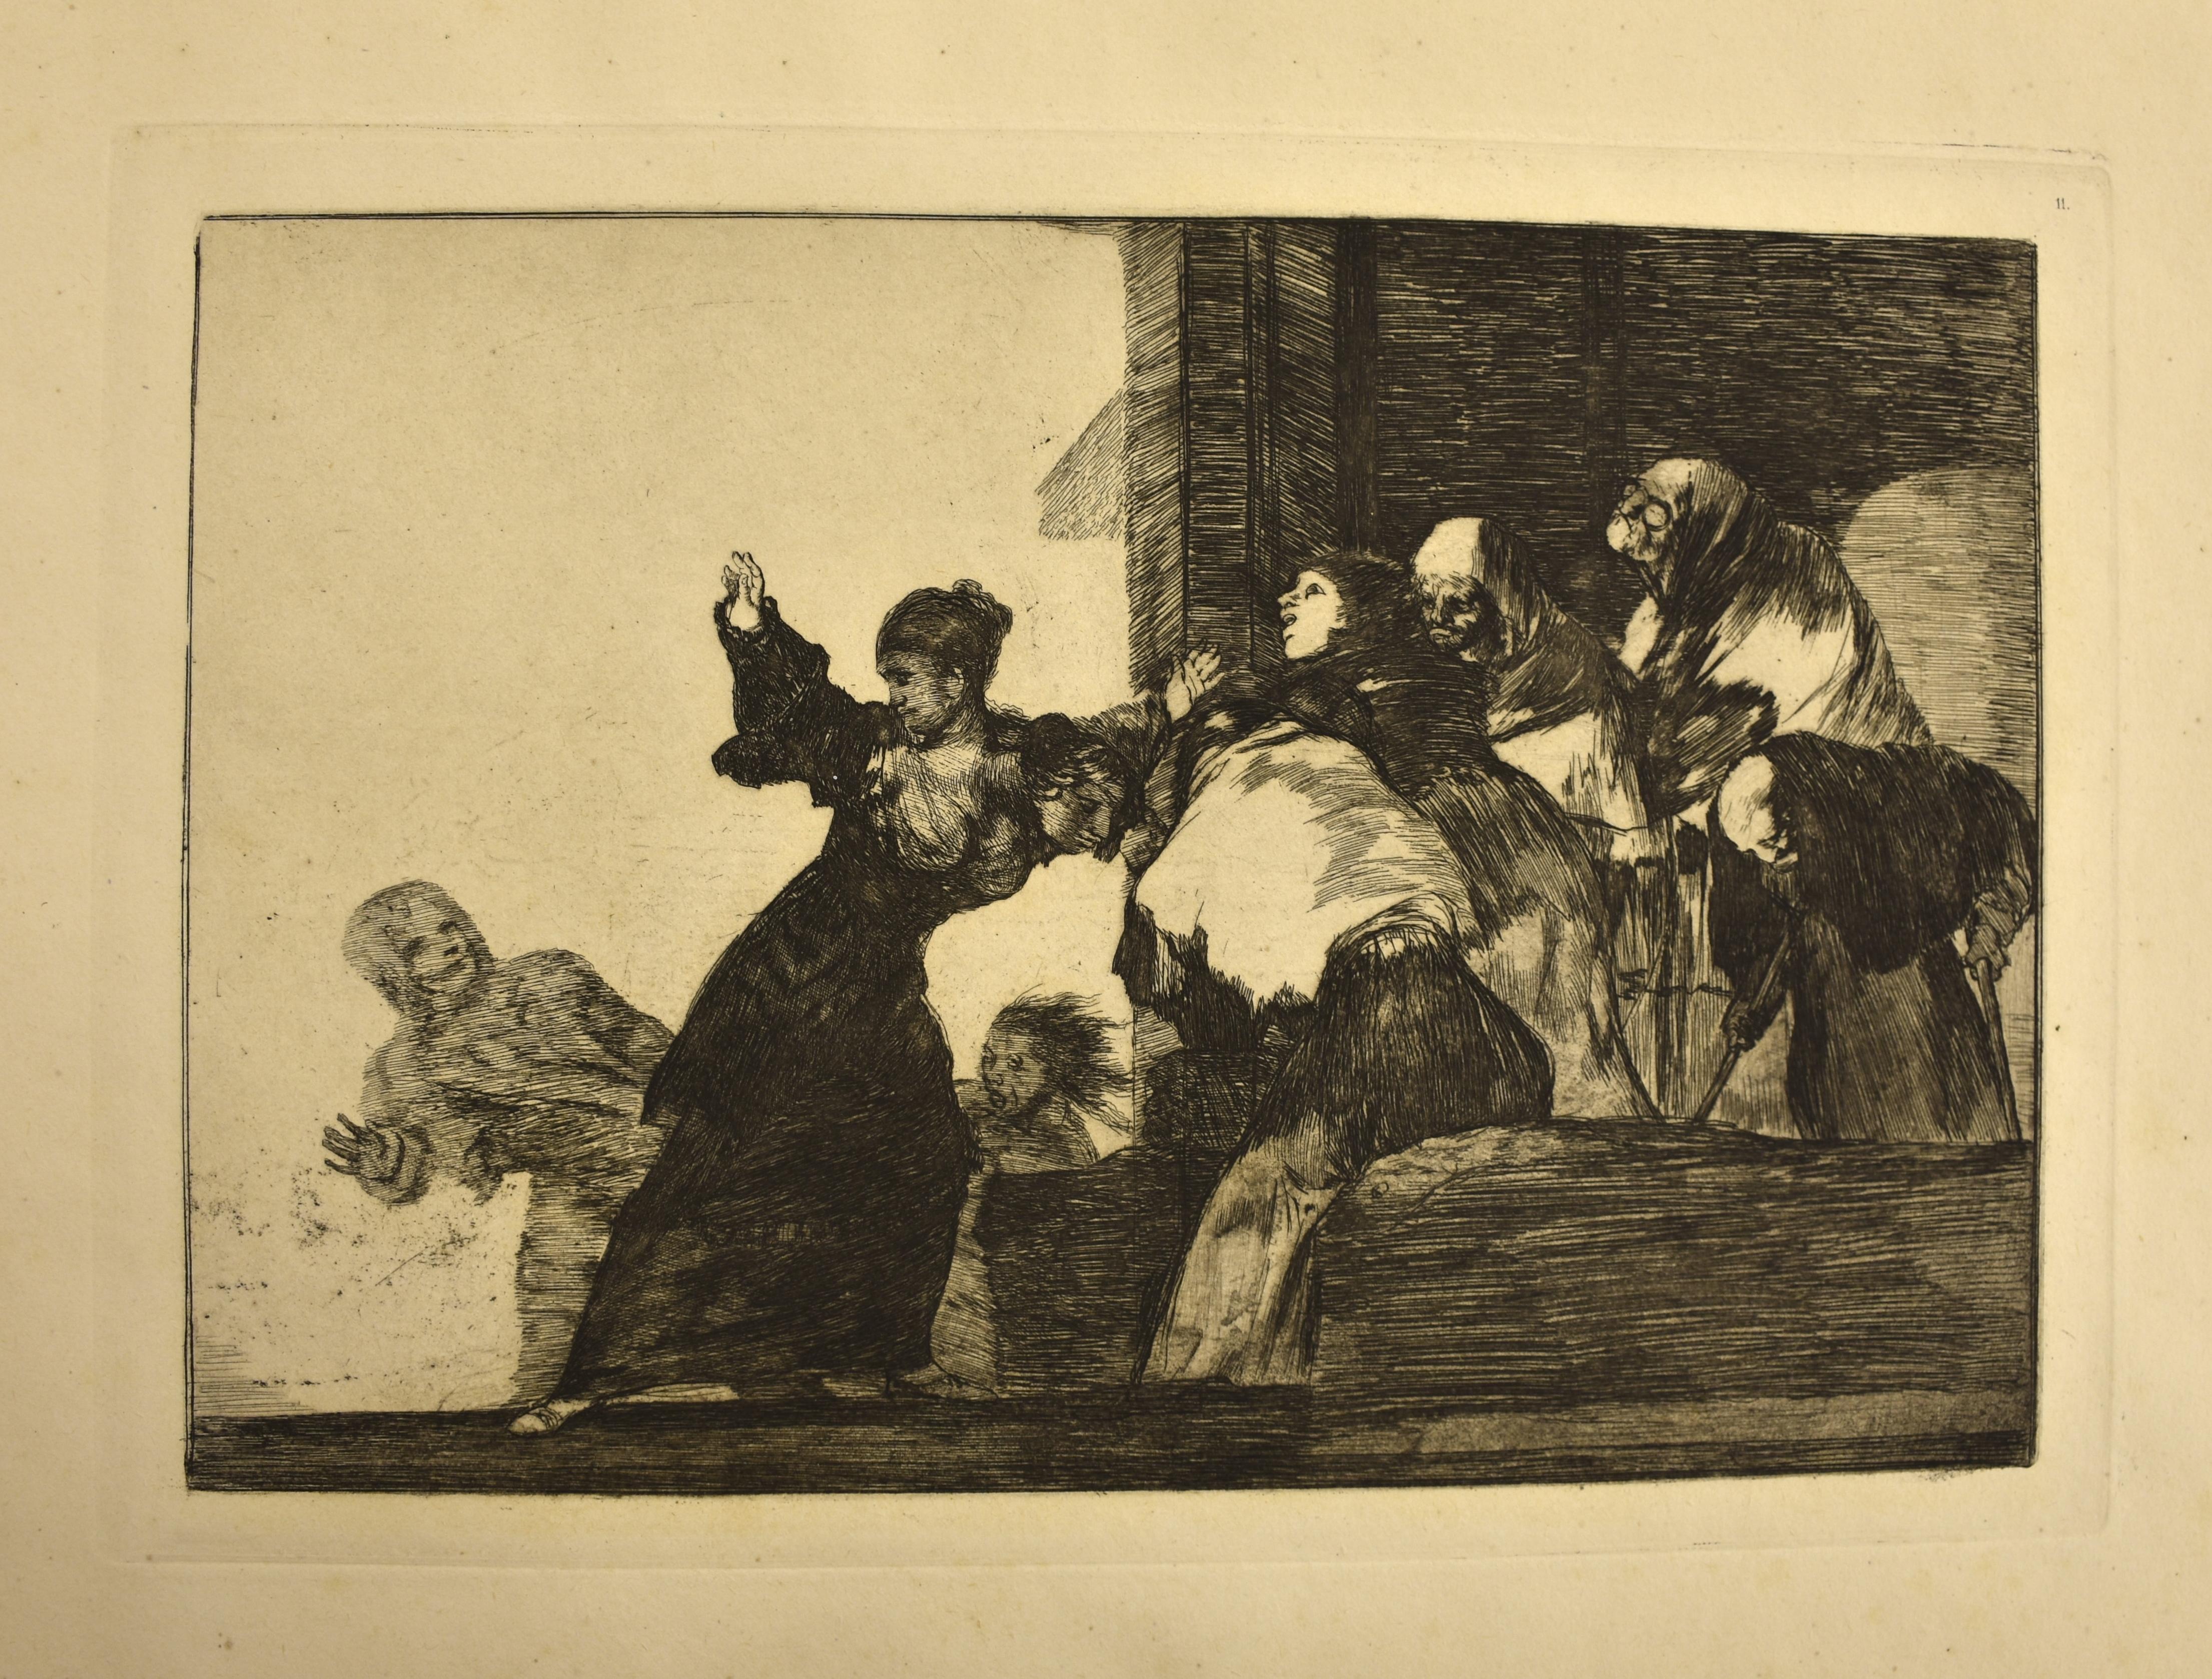 Complete Collection of Los Proverbios by Francisco Goya - 1875 9